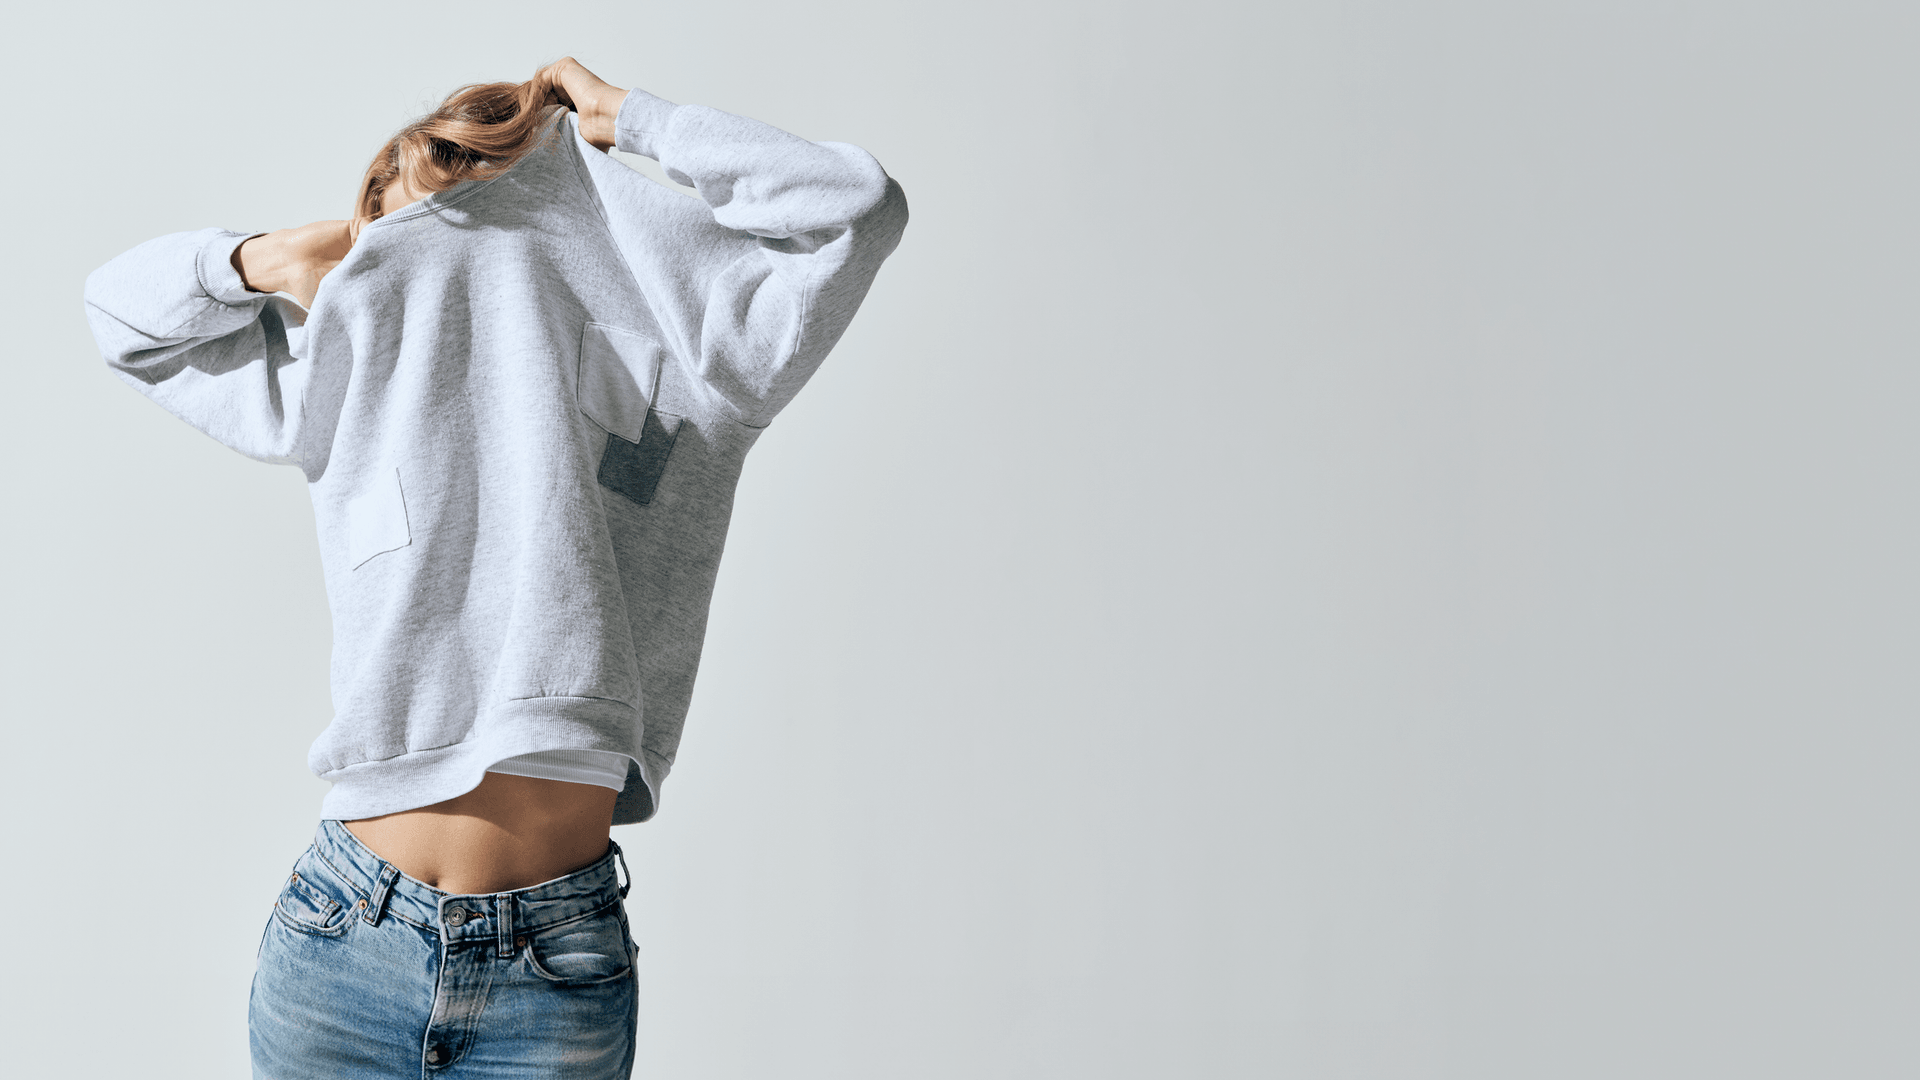 woman pulling sweatshirt over her head with jeans on